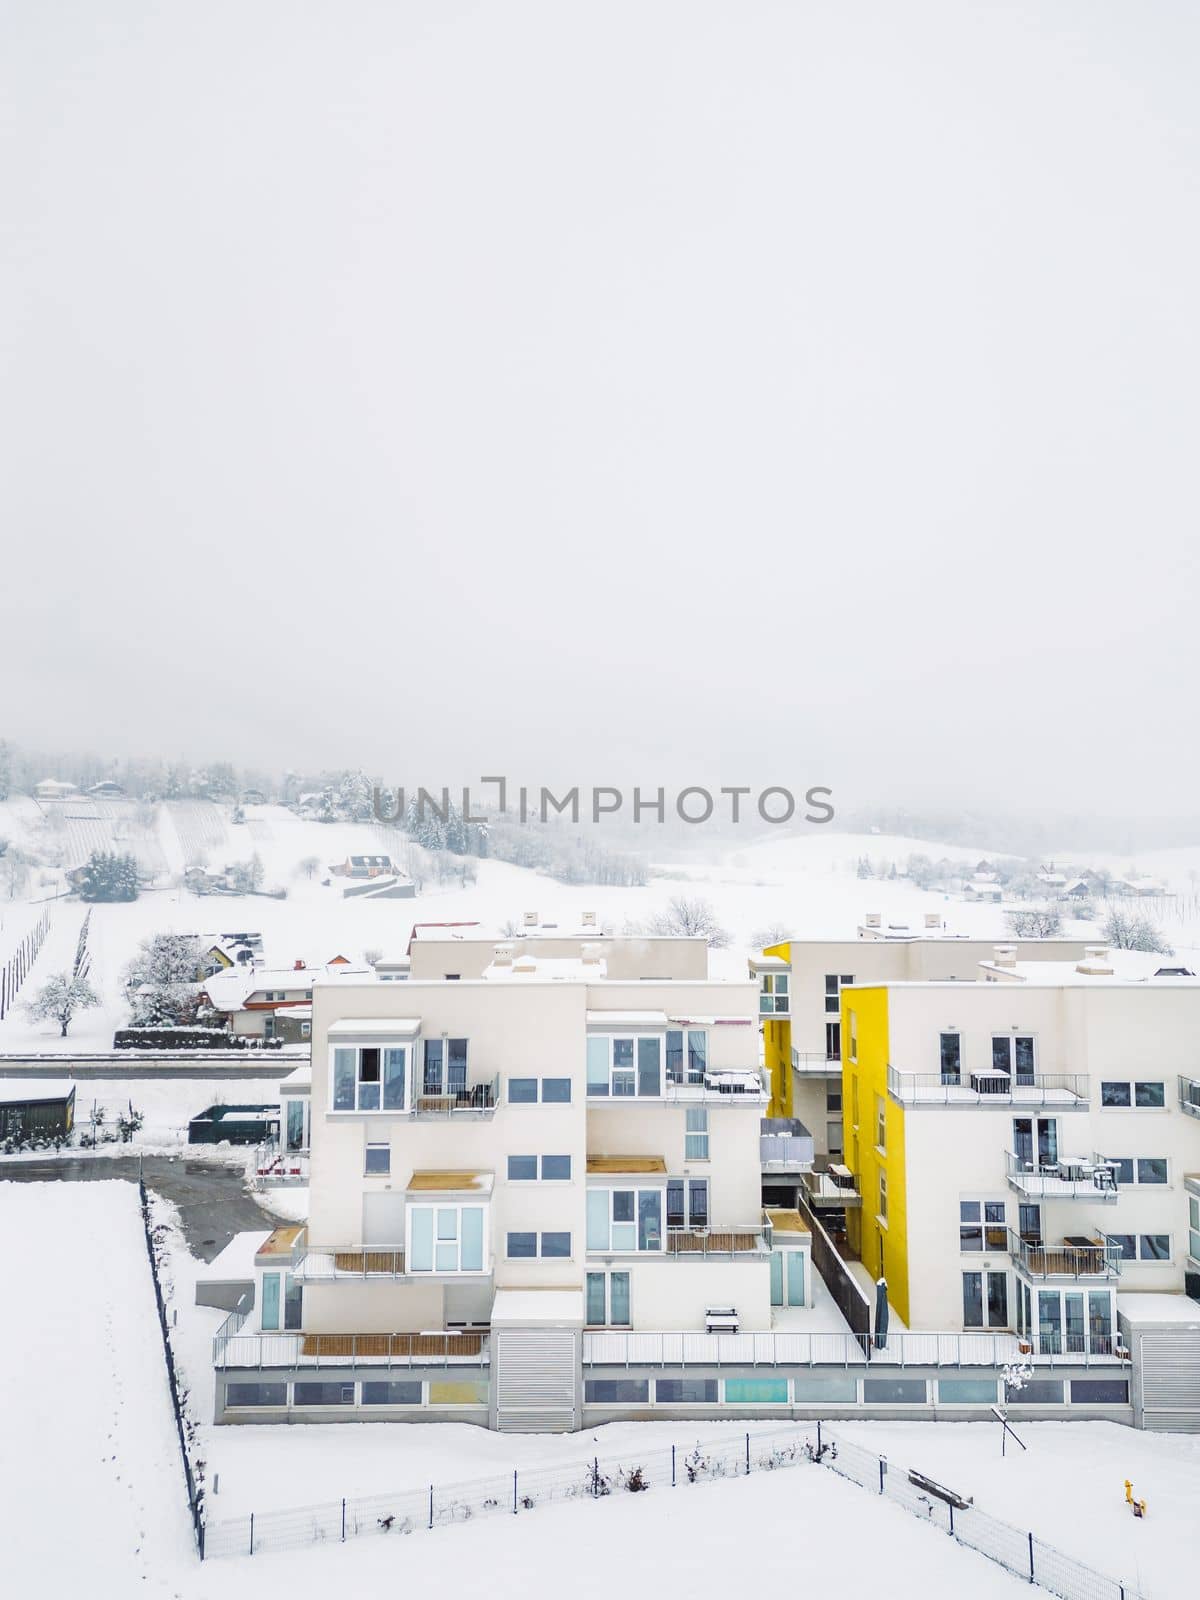 Newly build apartment complex, modern architecture, residential building on a snowy winter day.